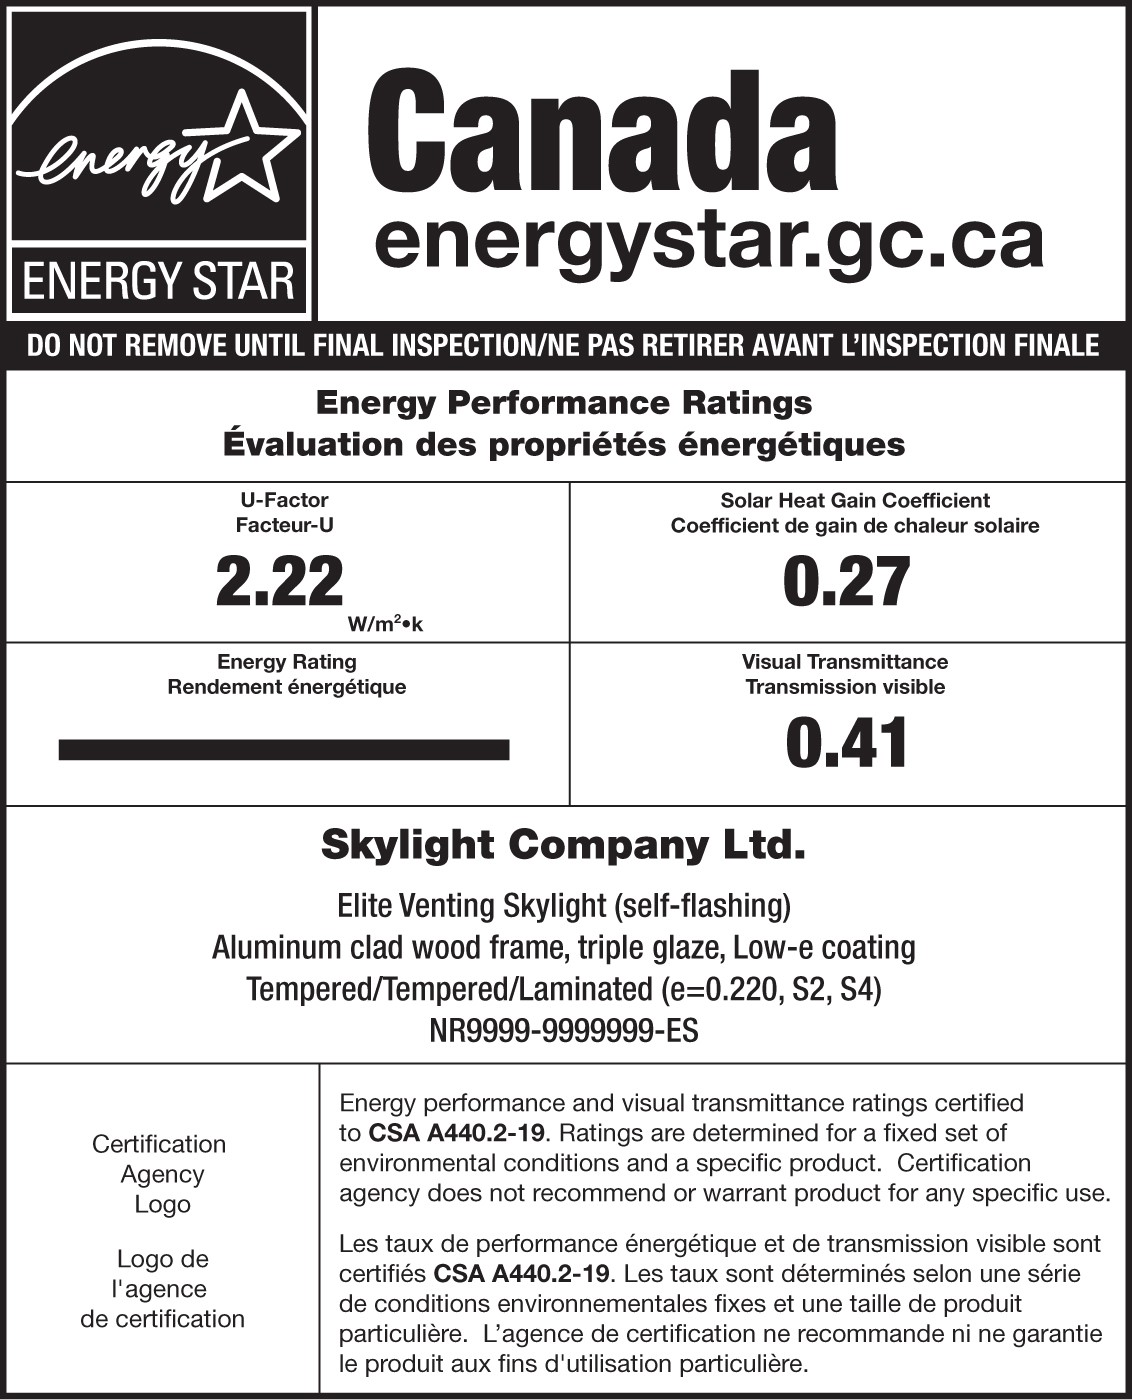 Sample ENERGY STAR / NRCan temporary label for a skylight. The ENERGY STAR portion has an
ENERGY STAR certification mark indicating that the product is certified. The NRCan portion has an area for the logo of the certifiction agency, which will indicate that the product is certified, and the product’s specific performance ratings, brand name and model description.
